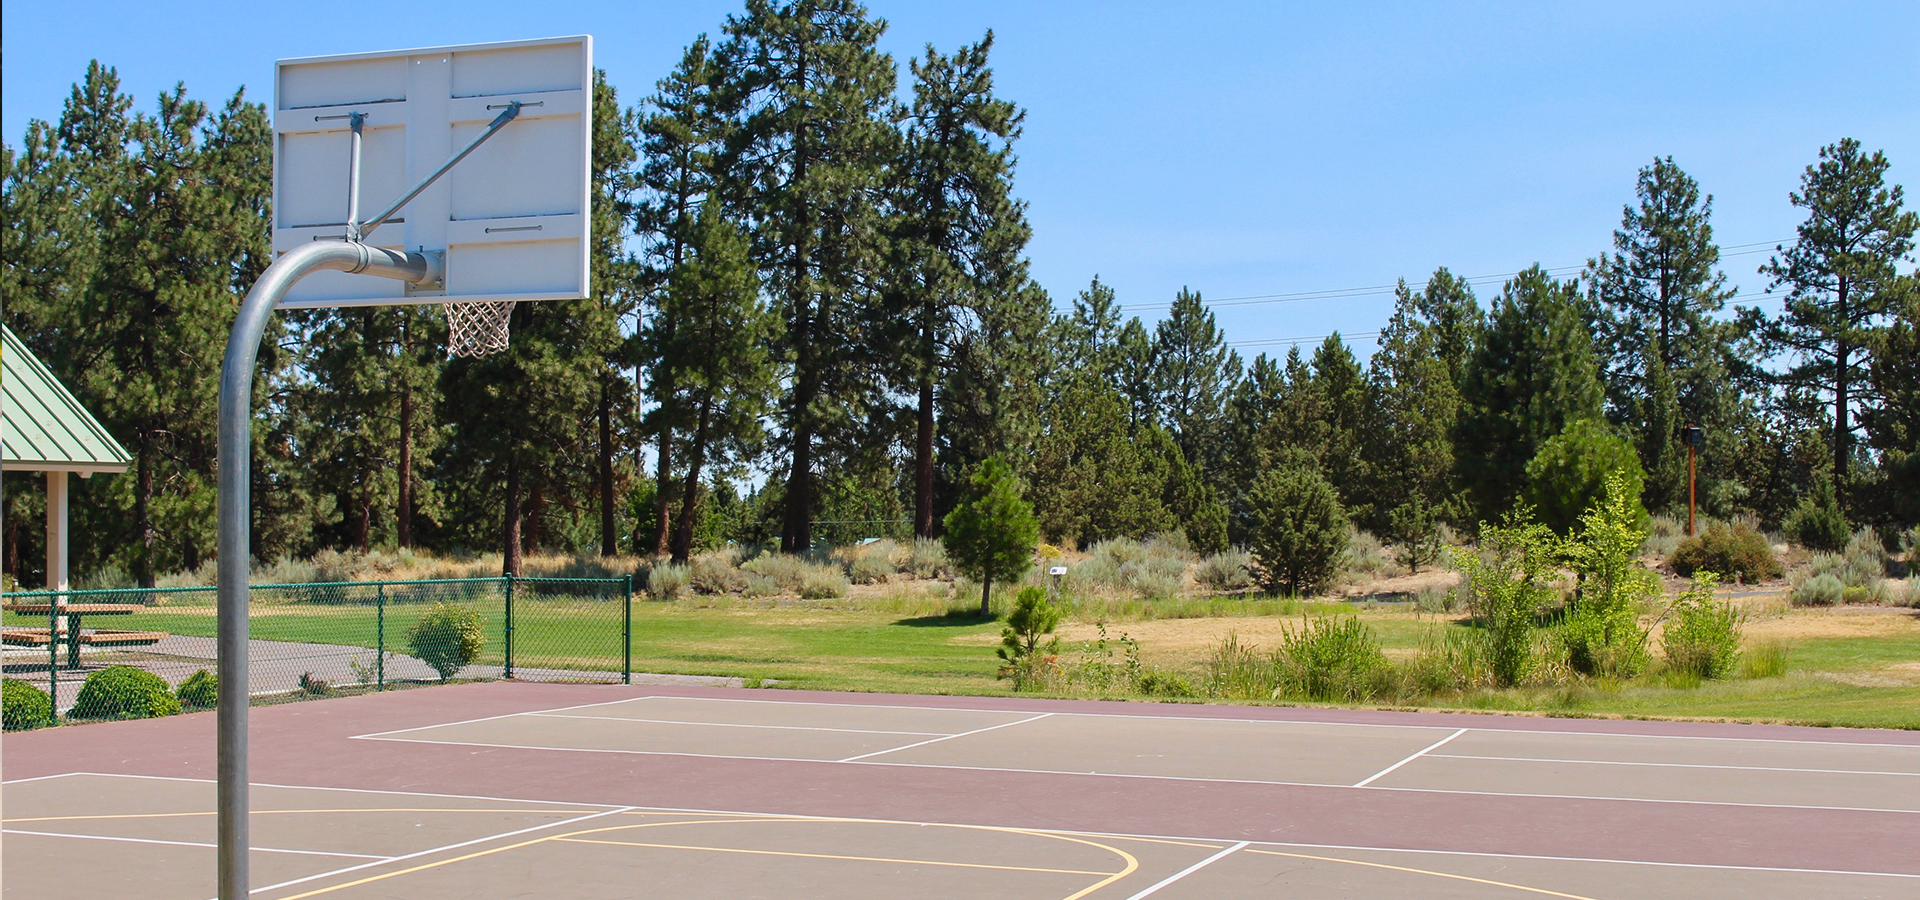 The basketball courts at Ponderosa Park.